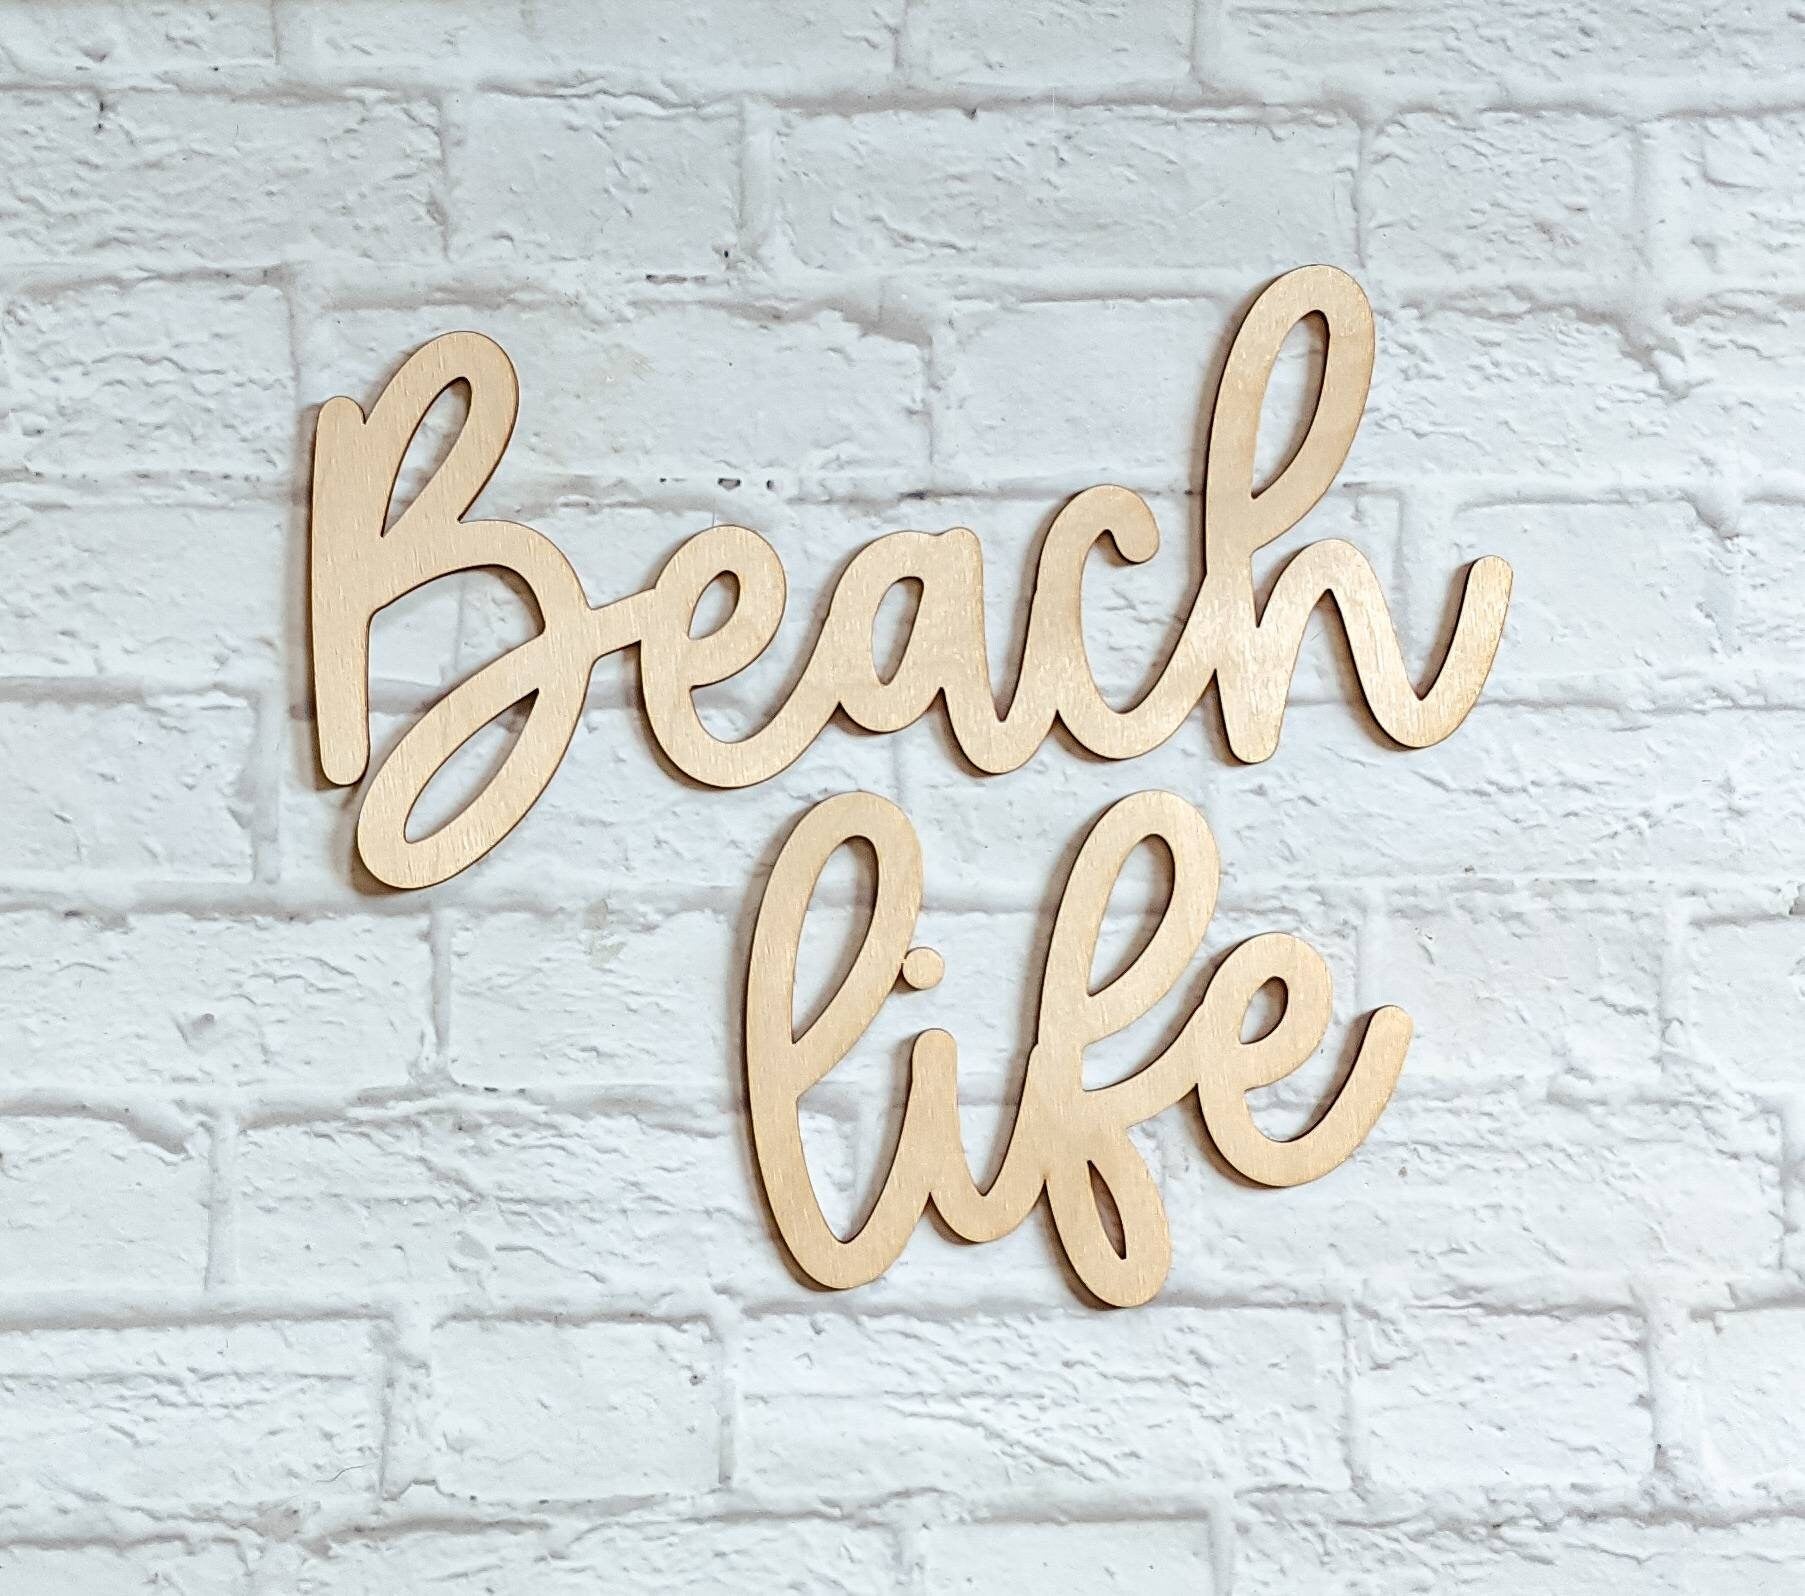 BEACH LIFE set - Various Sizes - Wooden Blanks- Wooden Shapes - laser cut shape - Fall crafts